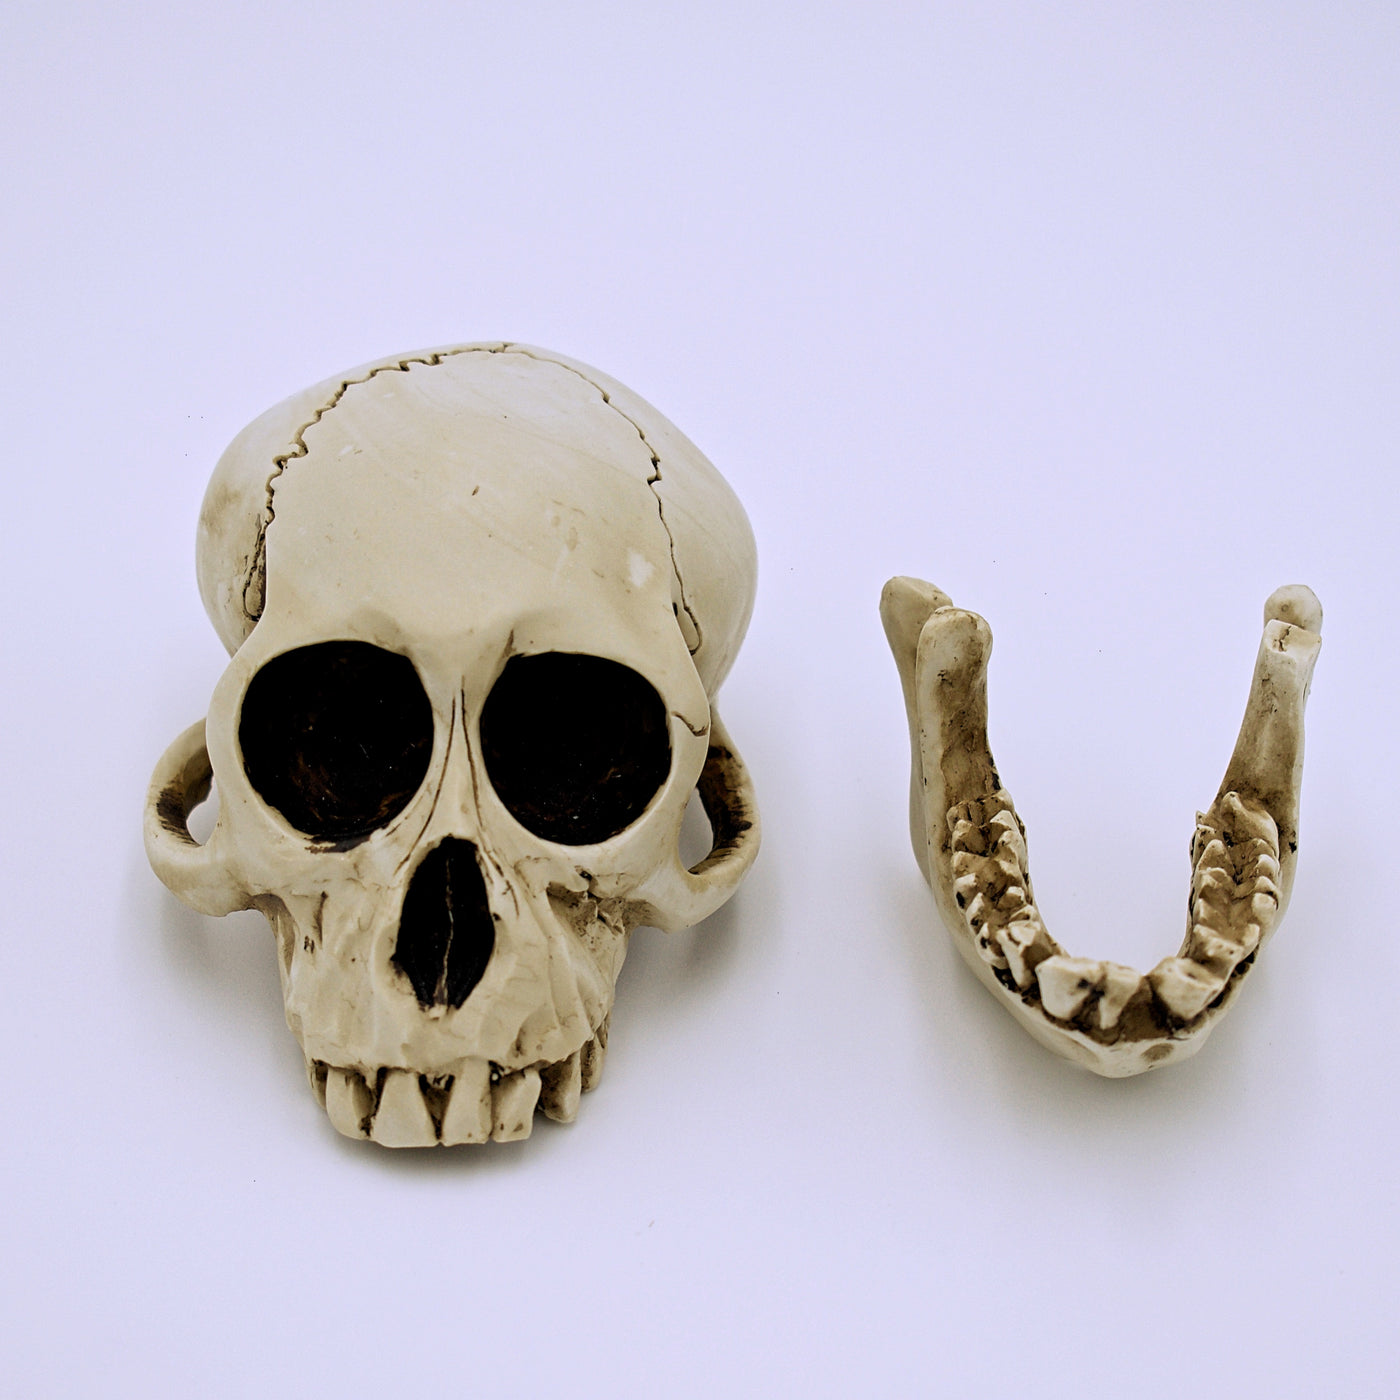 Monkey Skull Sculpture w/ Removable Jaw - The Cranio Collections